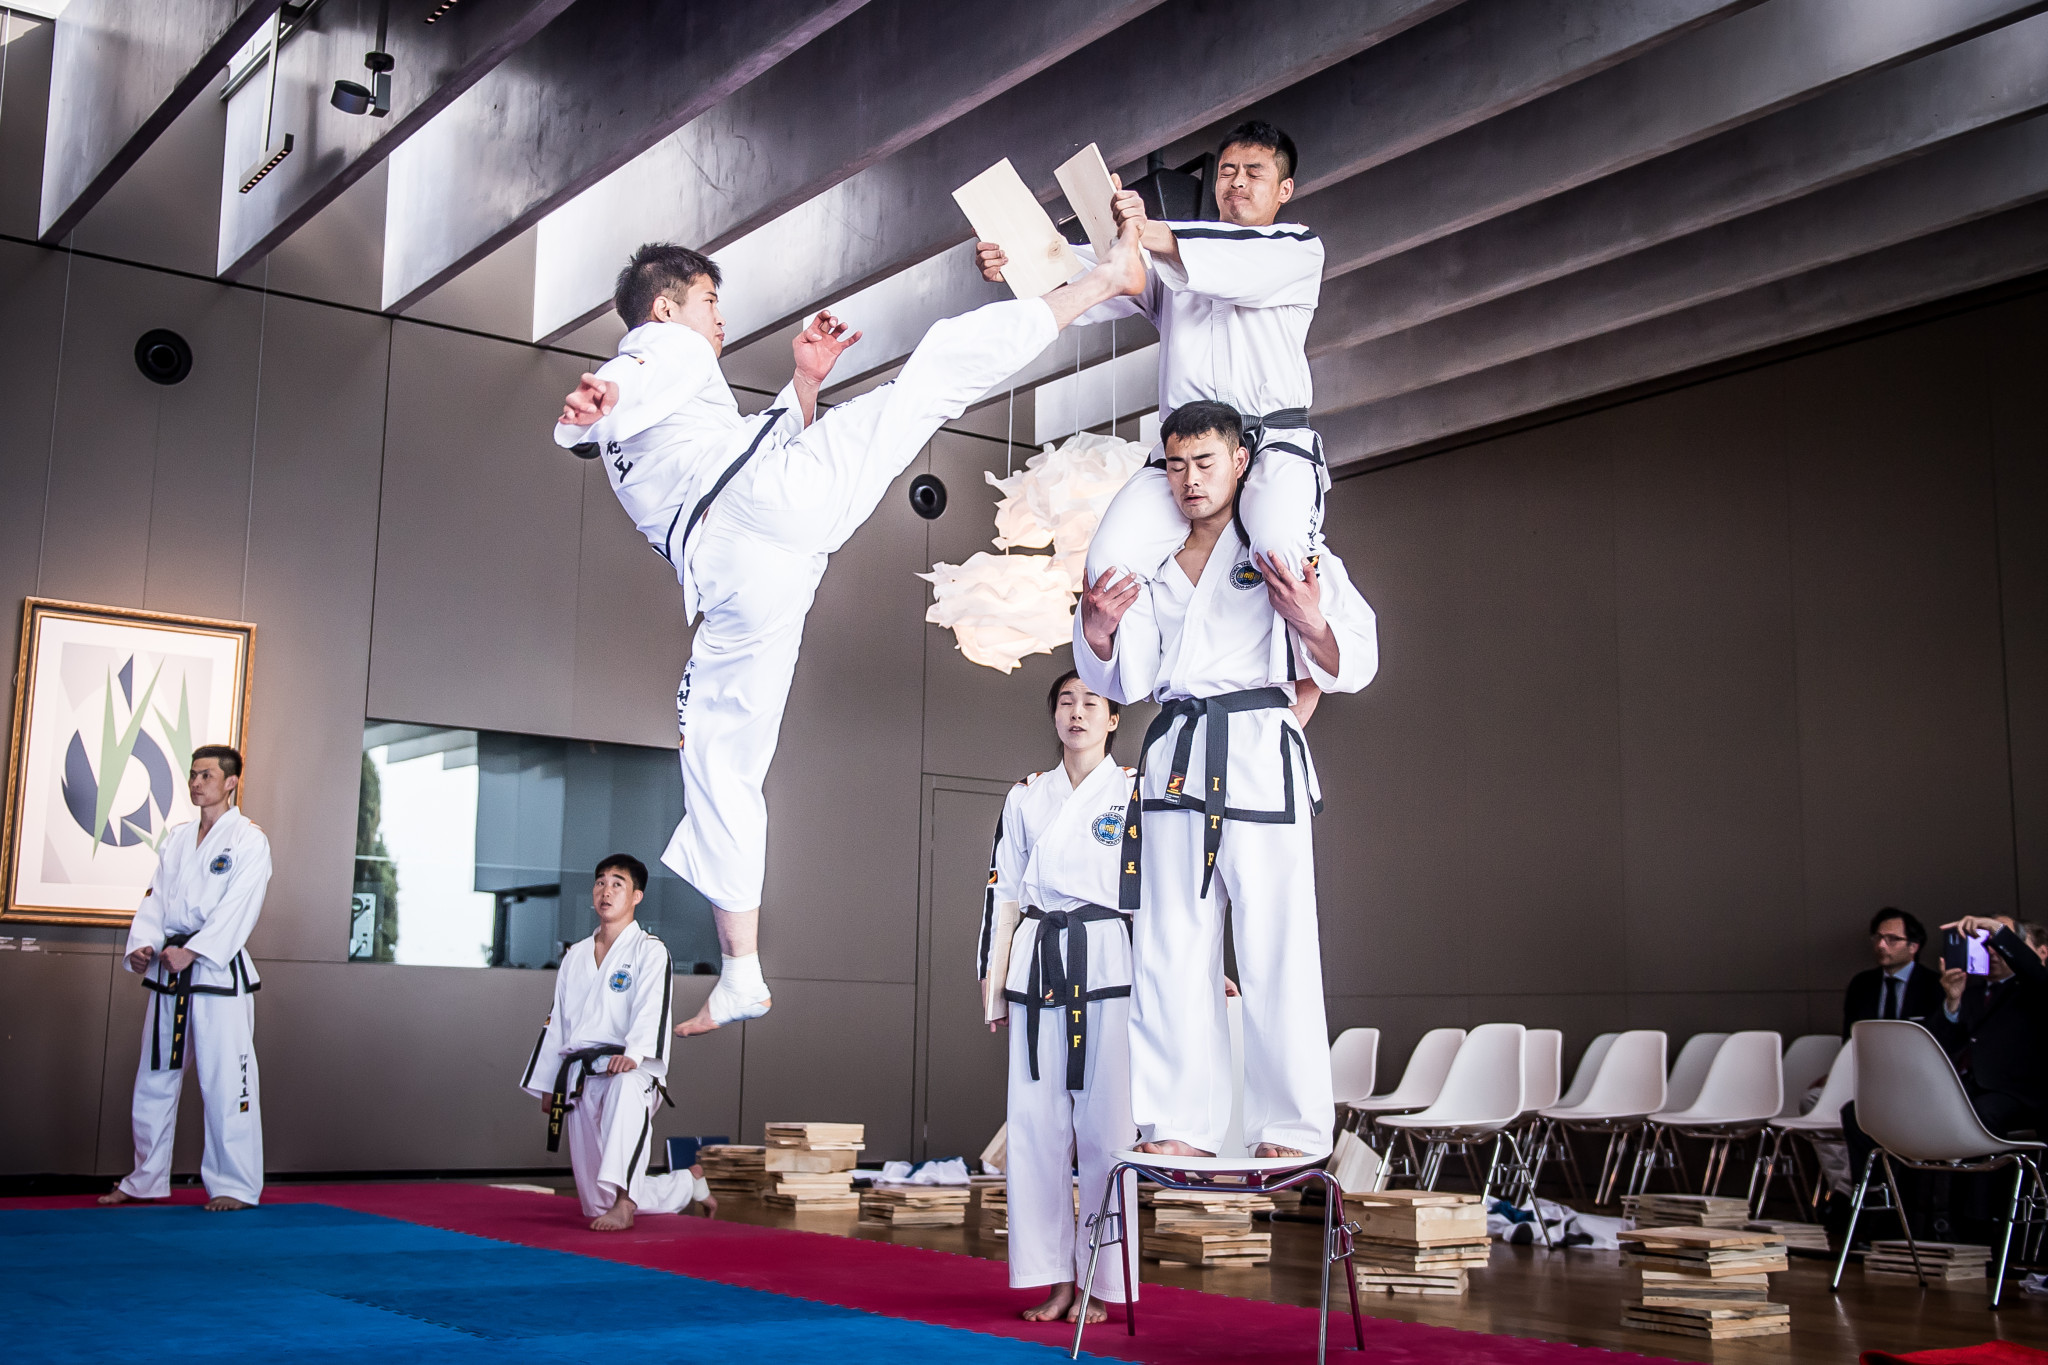 The joint demonstration then begun, with the team from the ITF performing first ©World Taekwondo